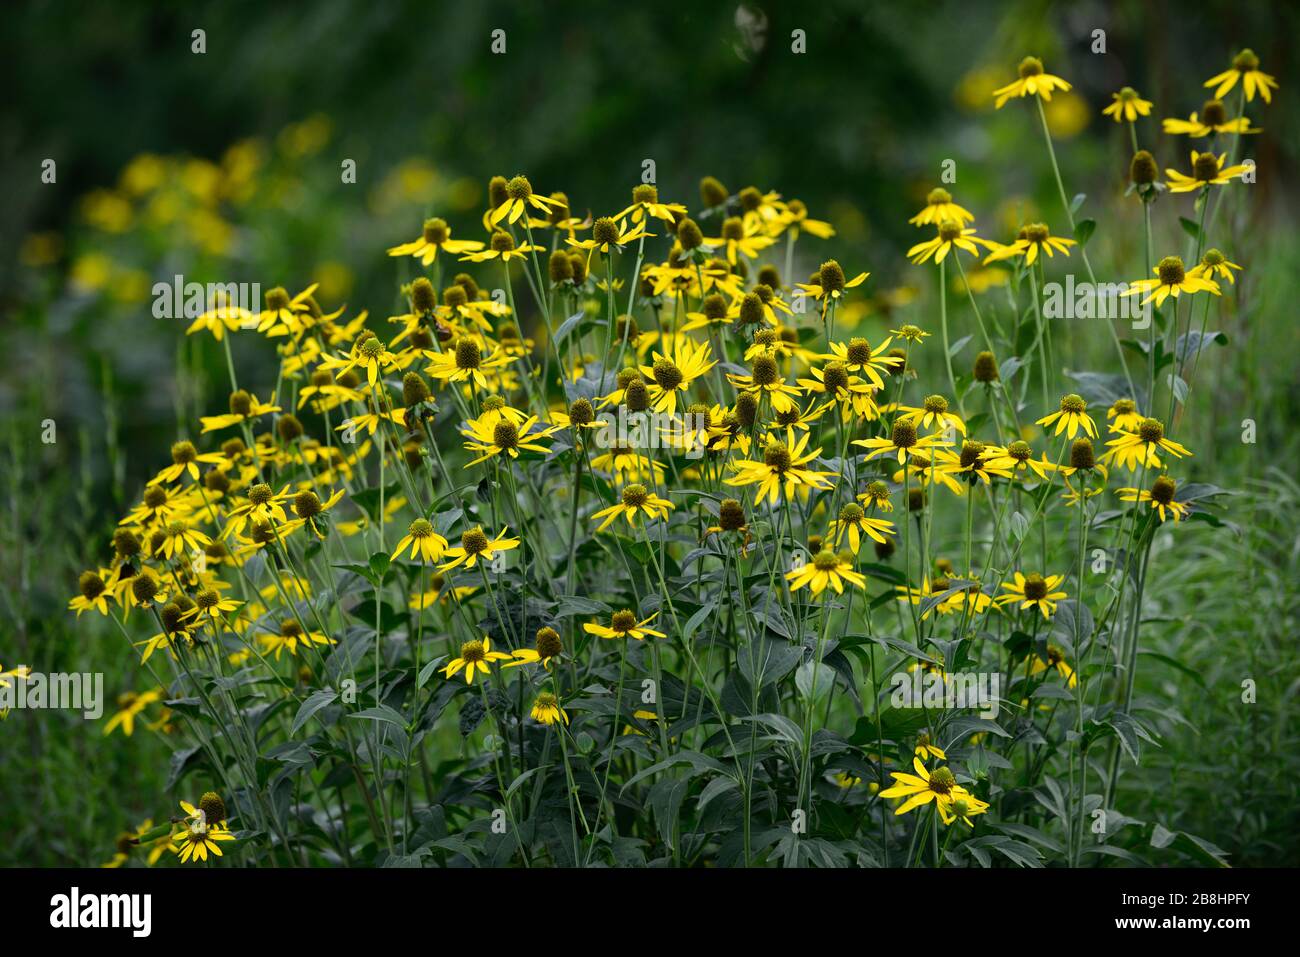 Rudbeckia Laciniata Herbstsonne Cutleaf Coneflower Yellow Flower With Green Central Cone Rudbeckias Garden Perennial Perennials Rm Floral Stock Photo Alamy,Behr Paint Colors Chart